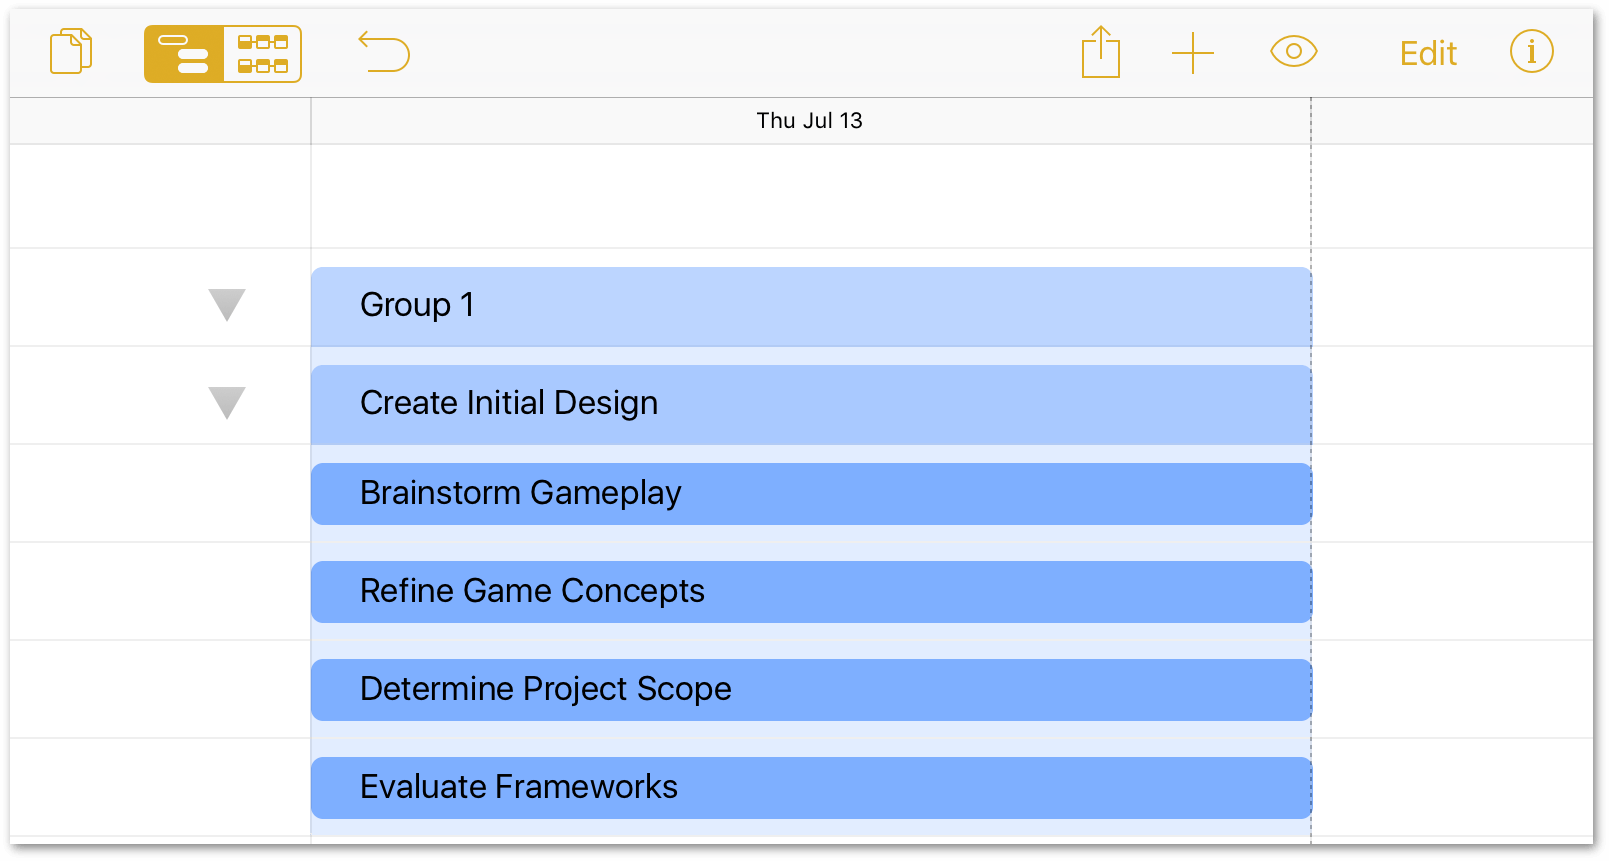 The Create Initial Design group.